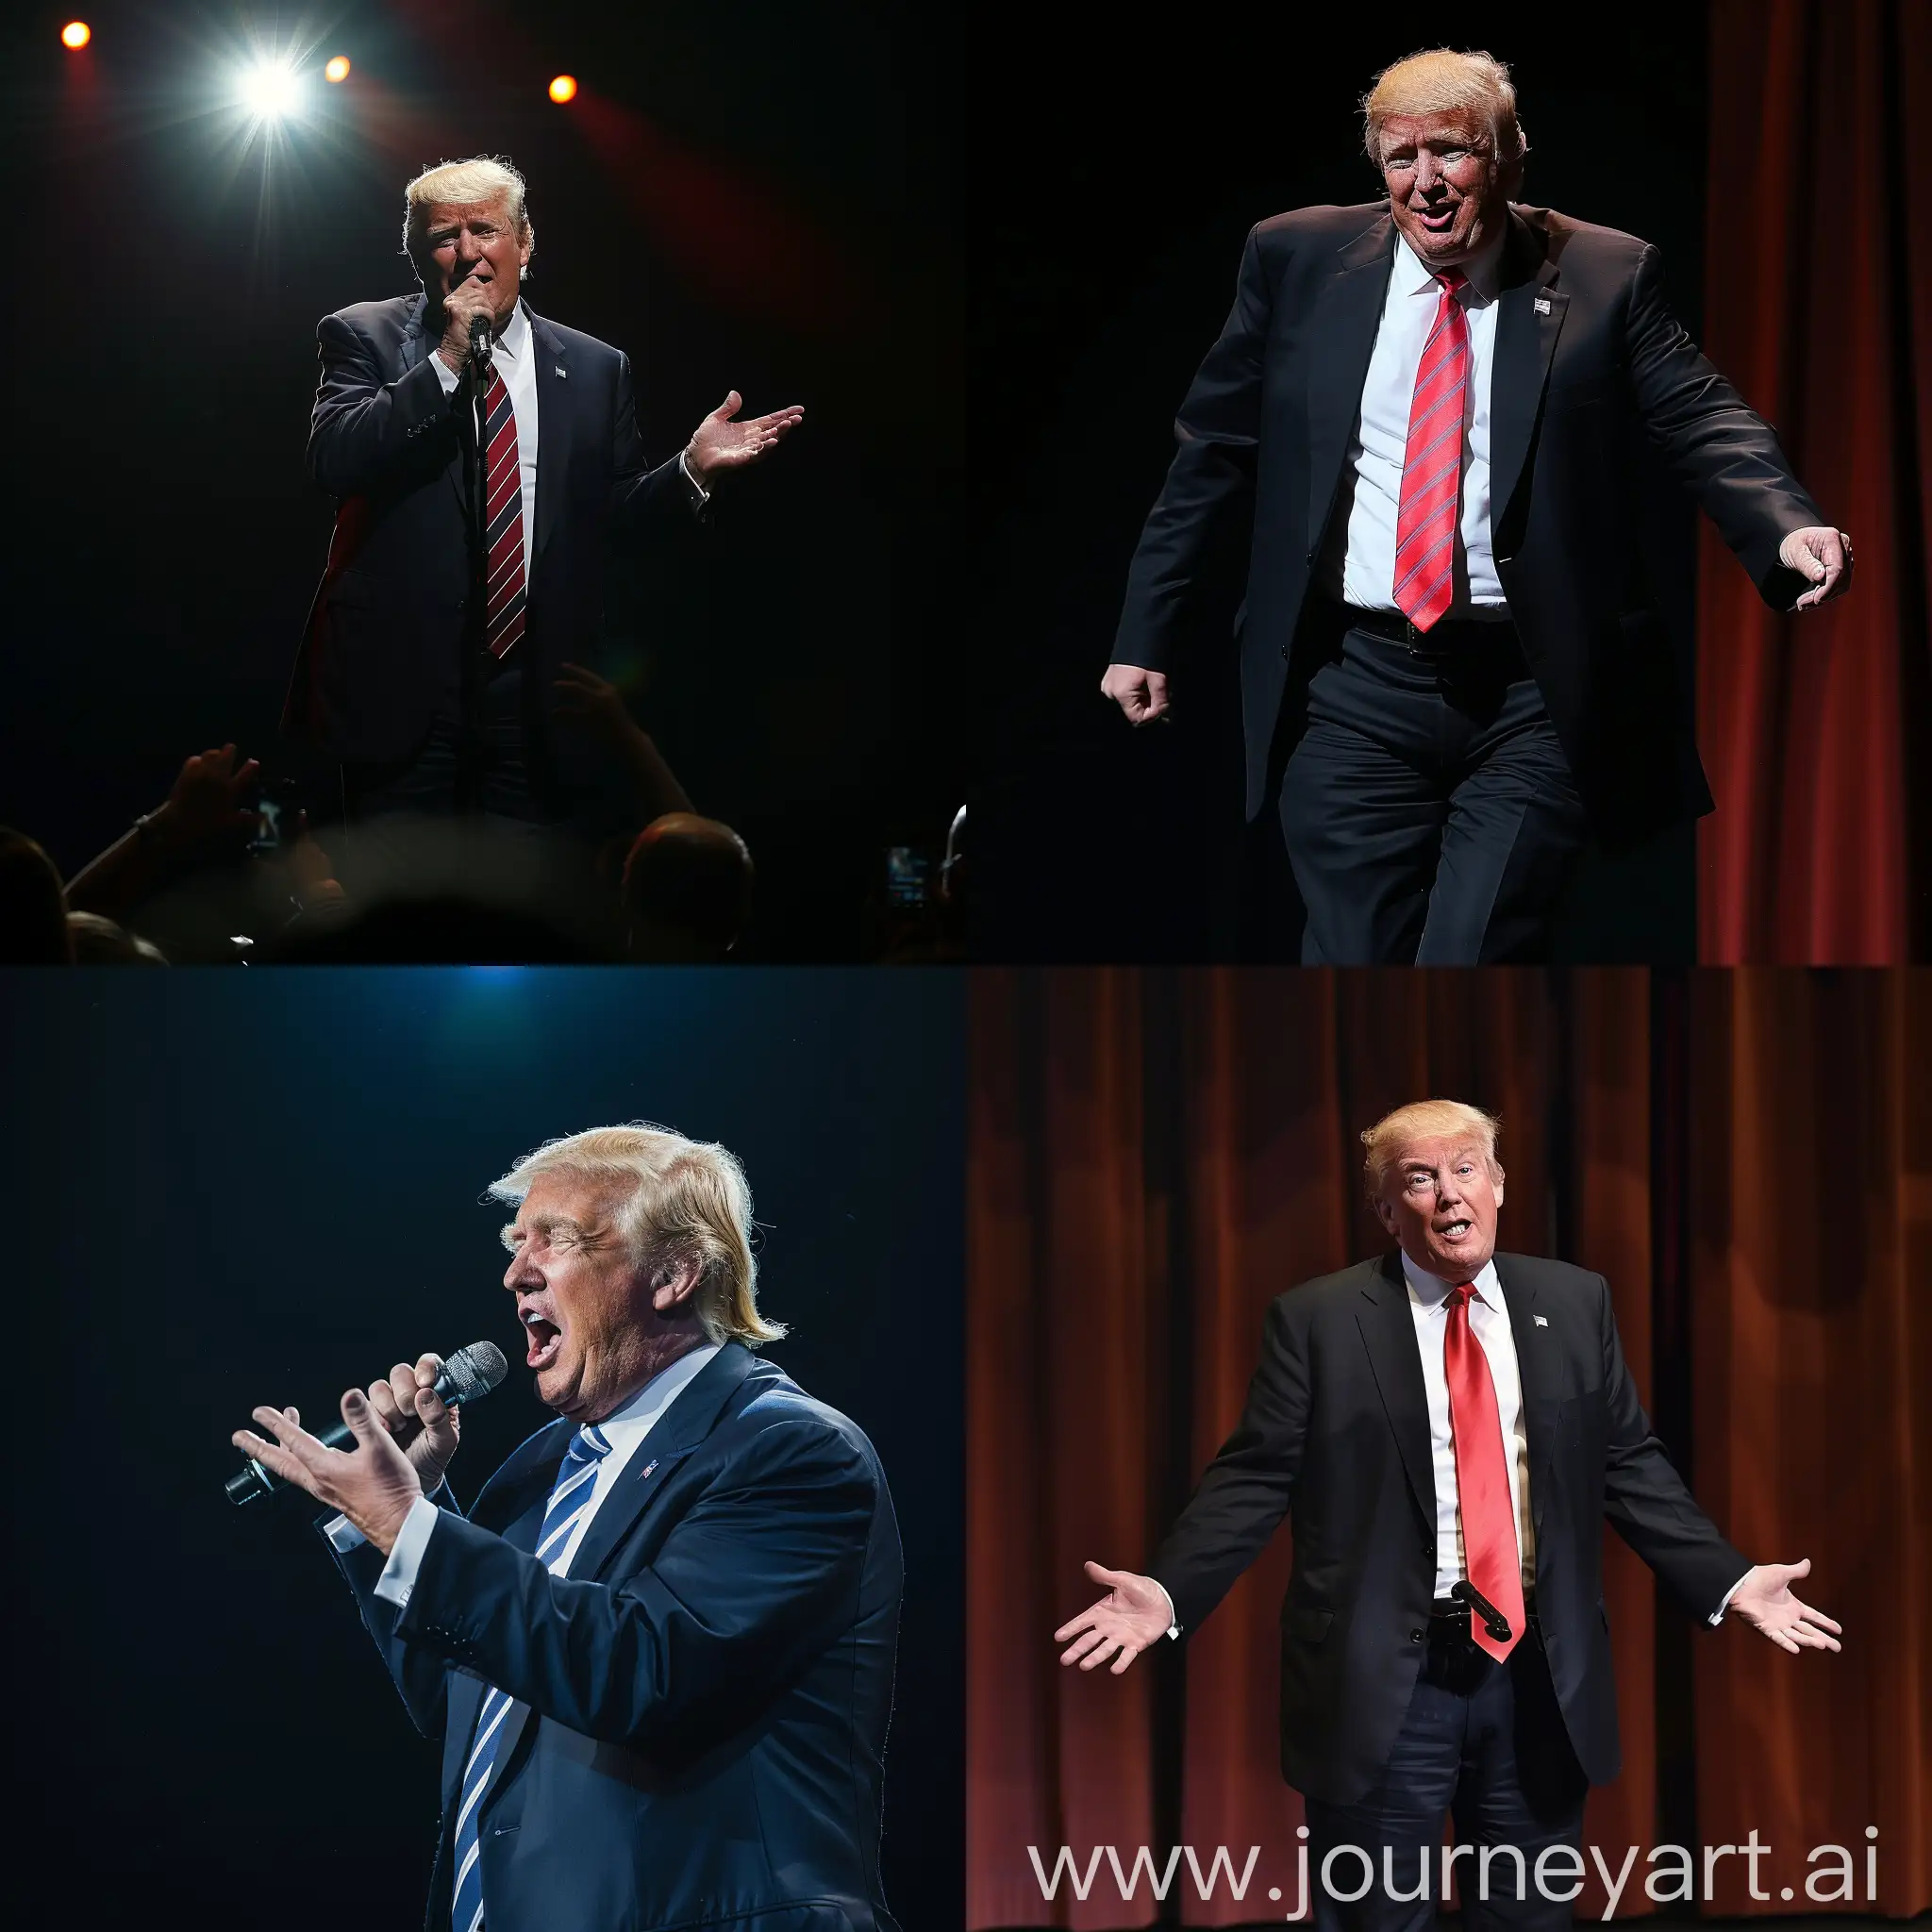 Image of Donald trump on stage